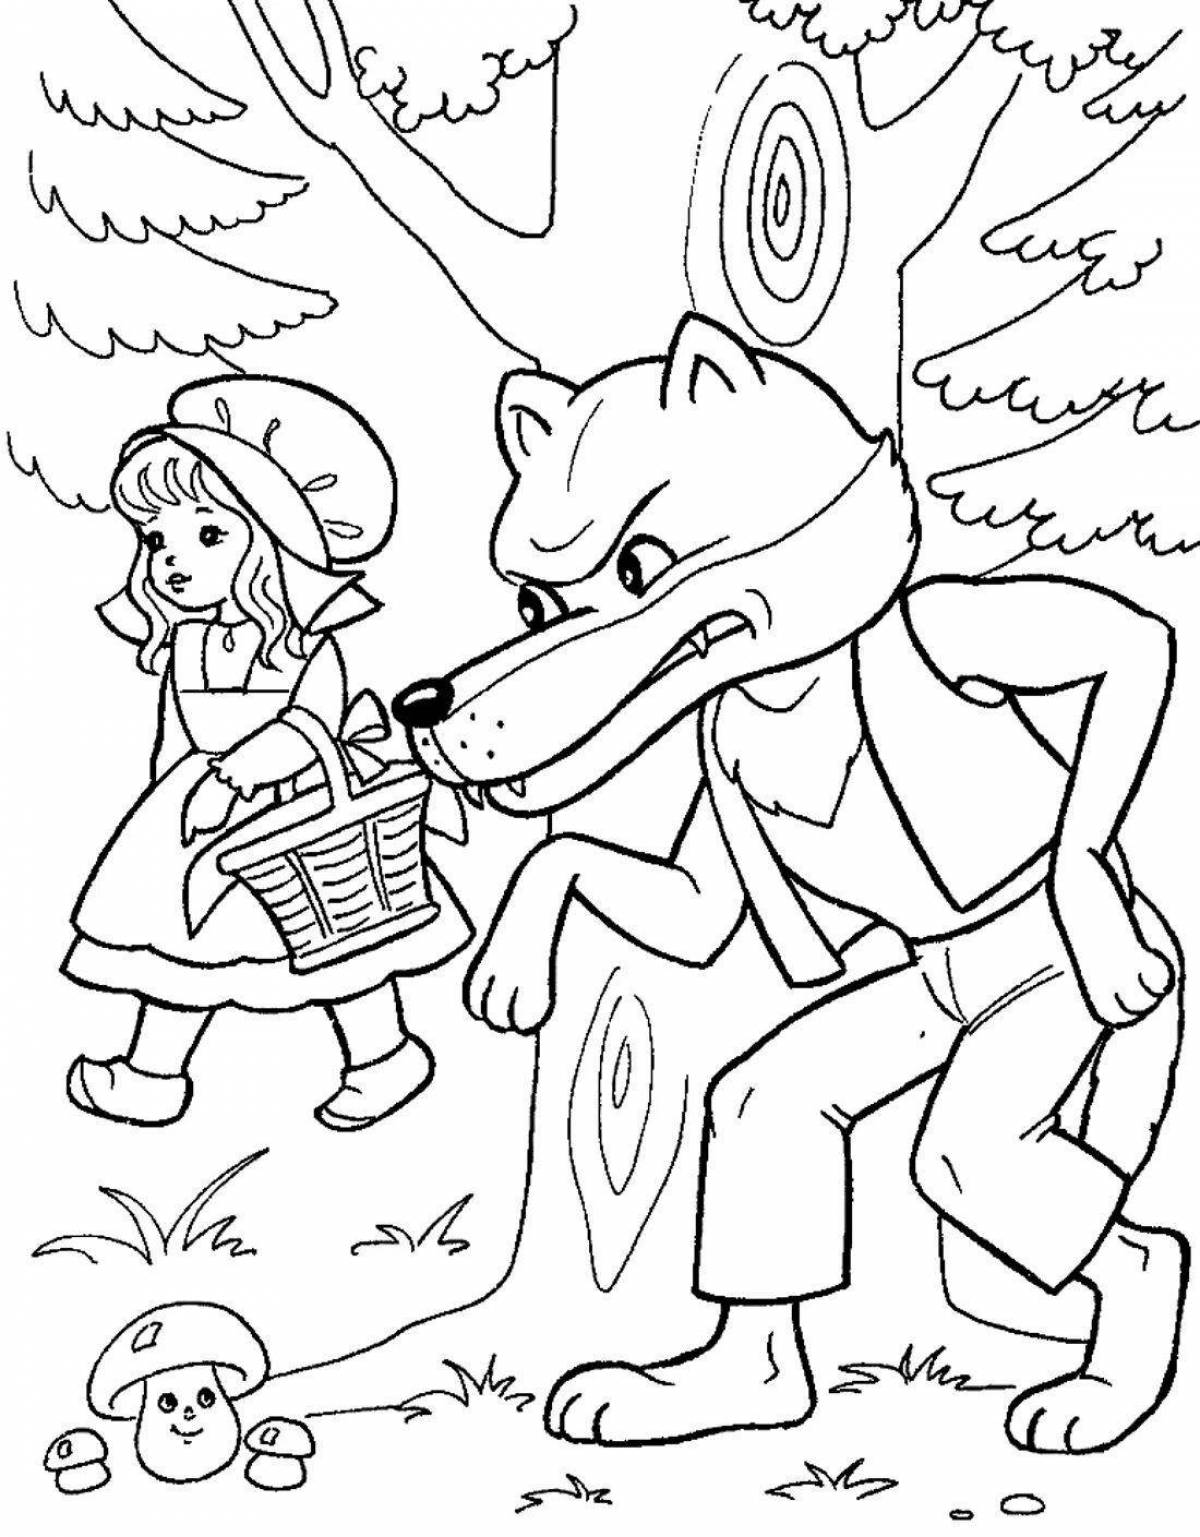 Rampant Little Red Riding Hood coloring book